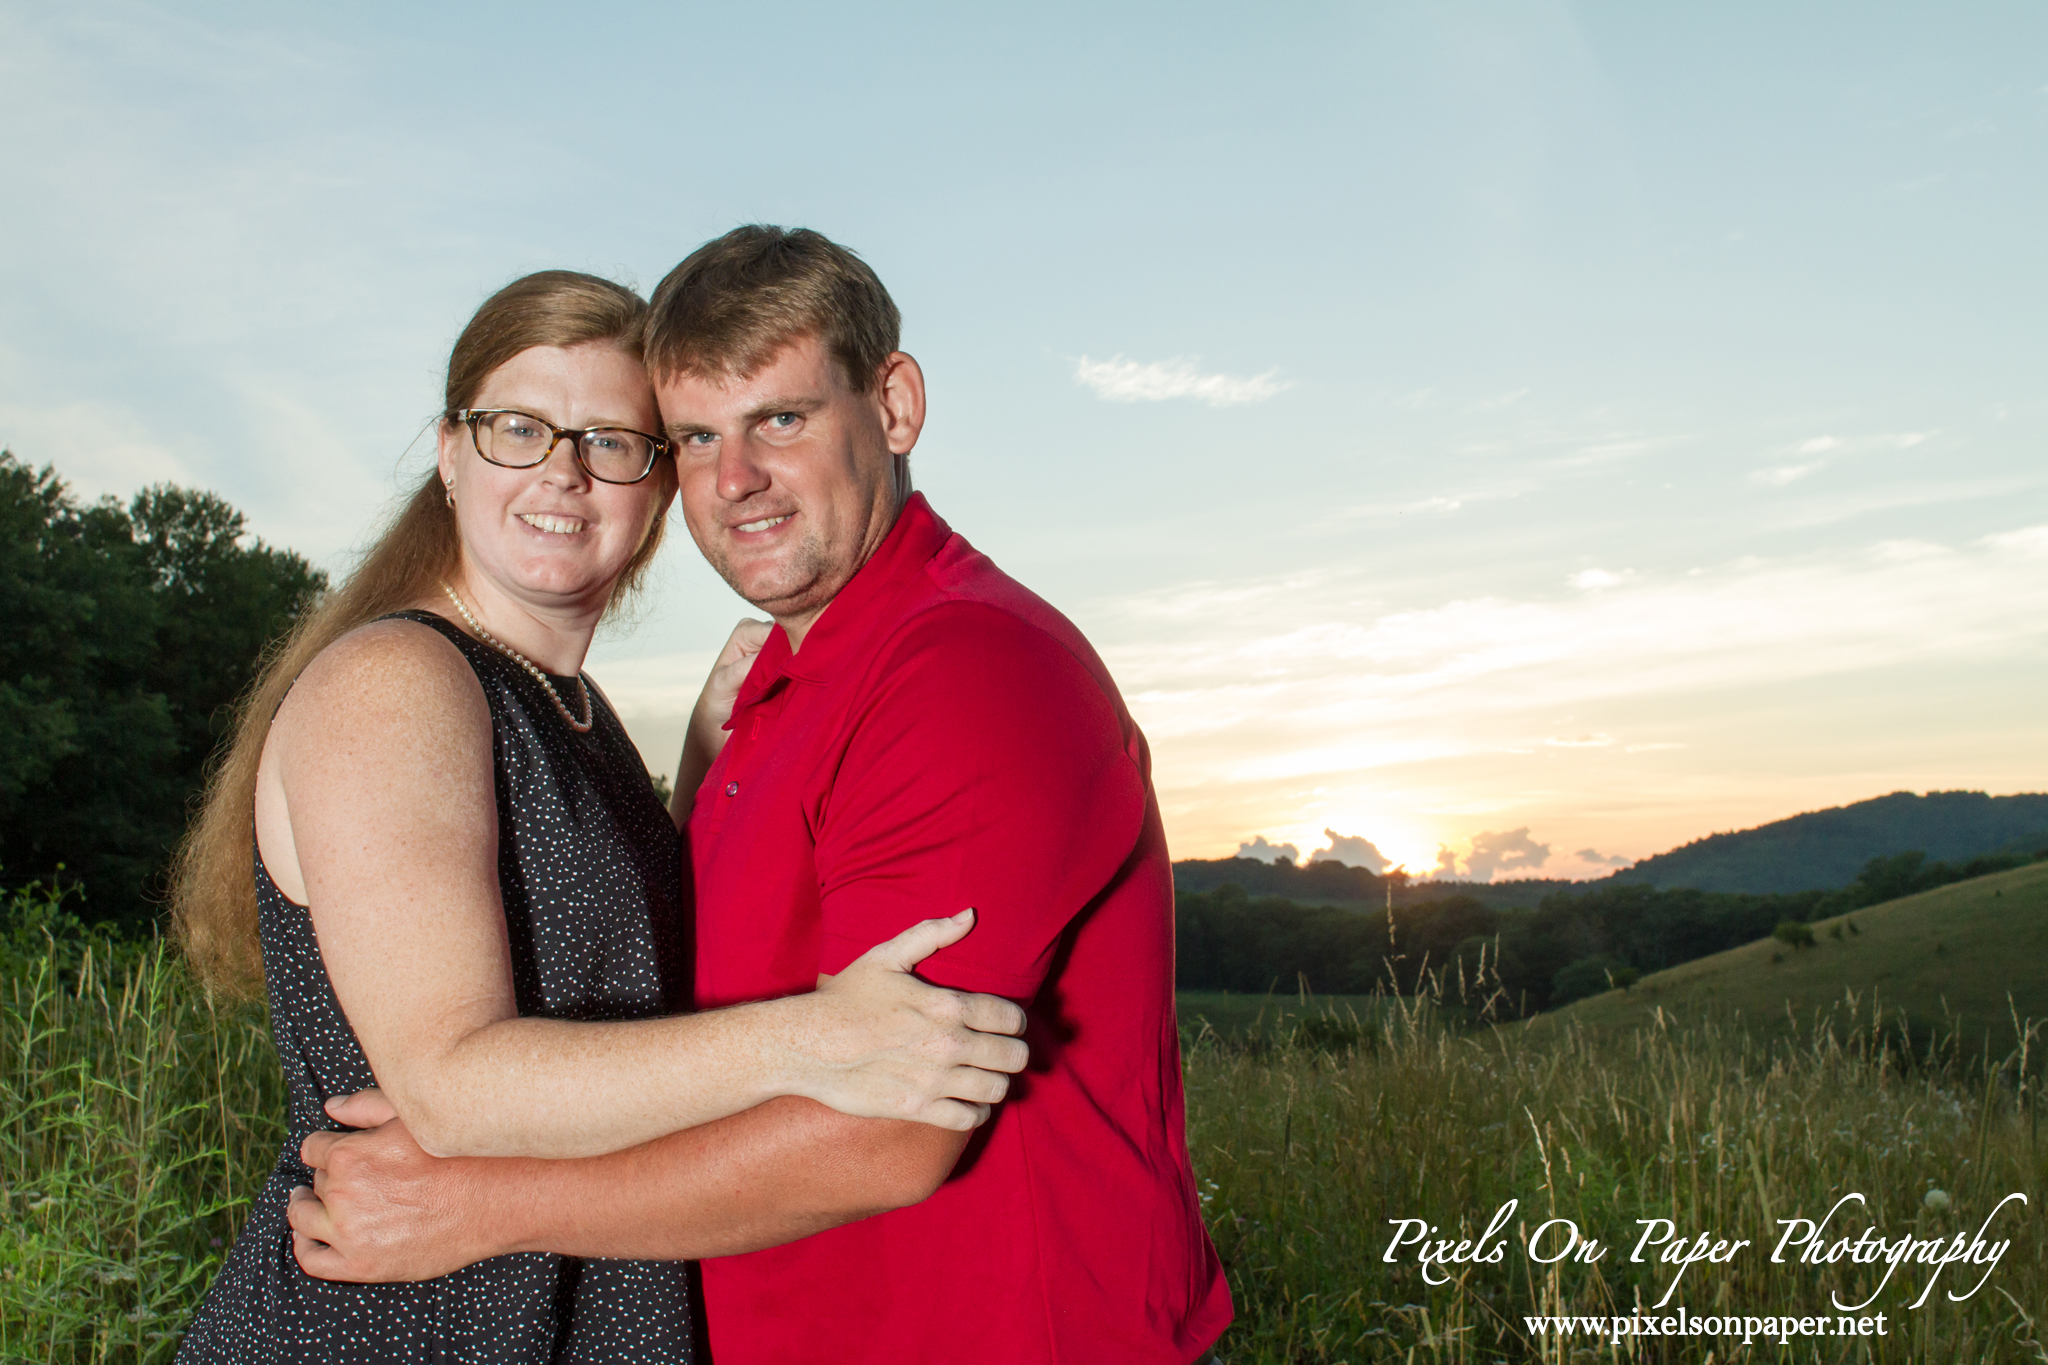 Blowing Rock NC wedding photographer, pixels on paper photographers outdoor engagement photo